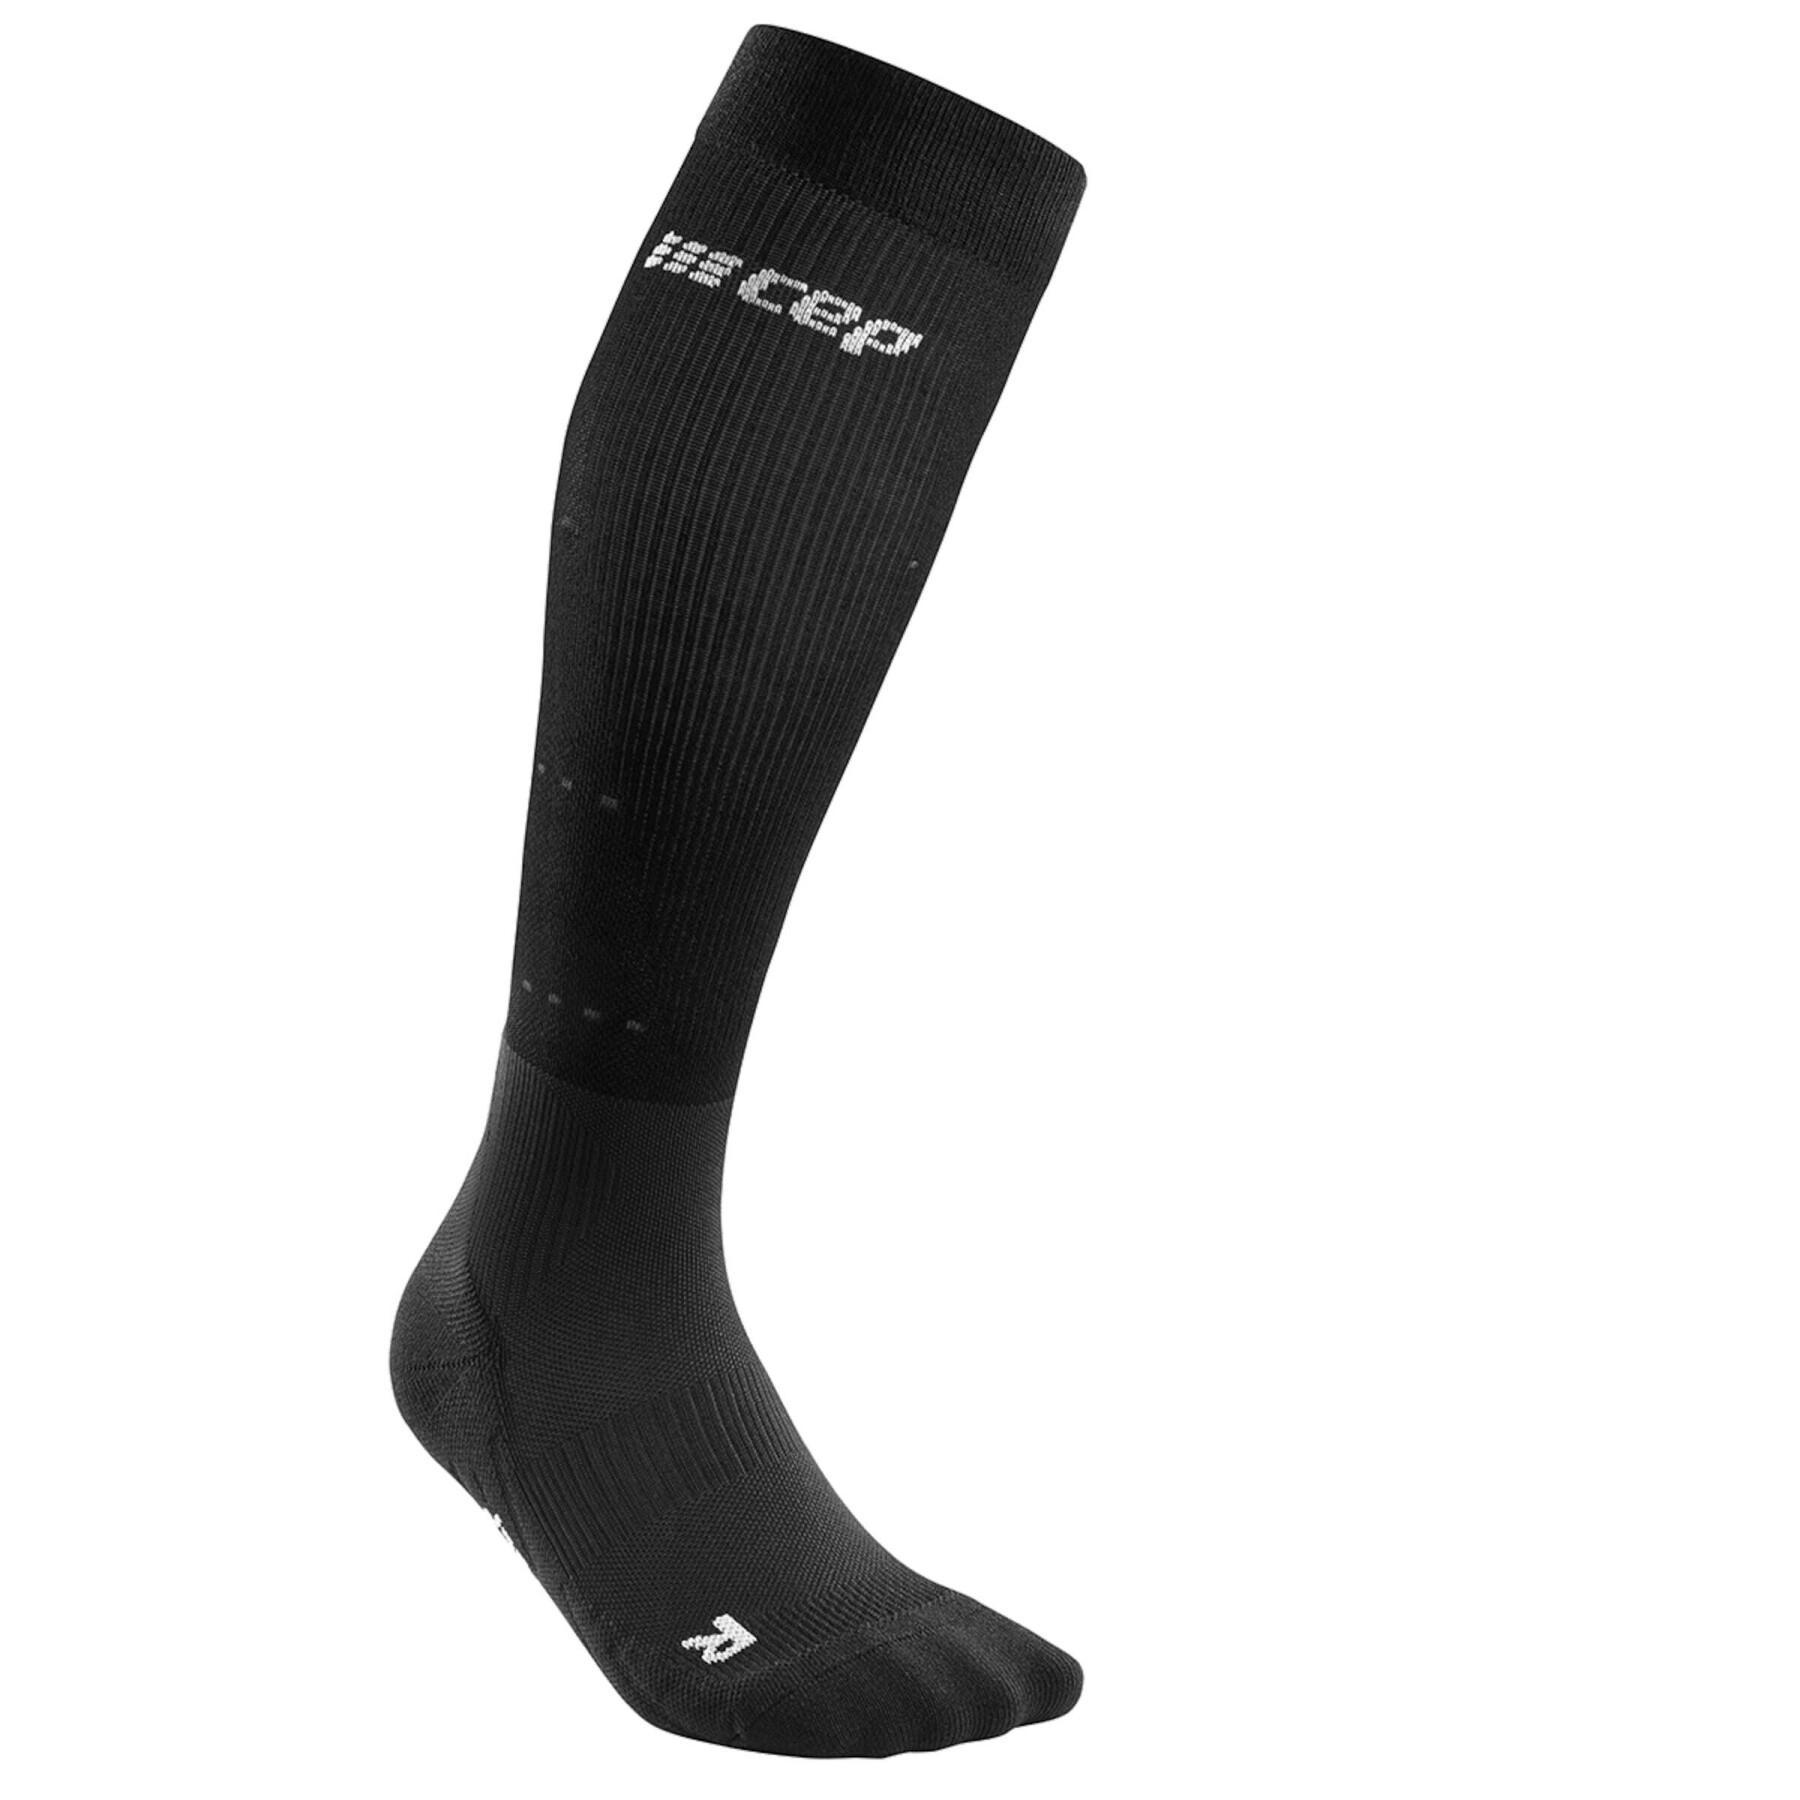 Recovery socks CEP Compression Infrared - Socks - Men's wear